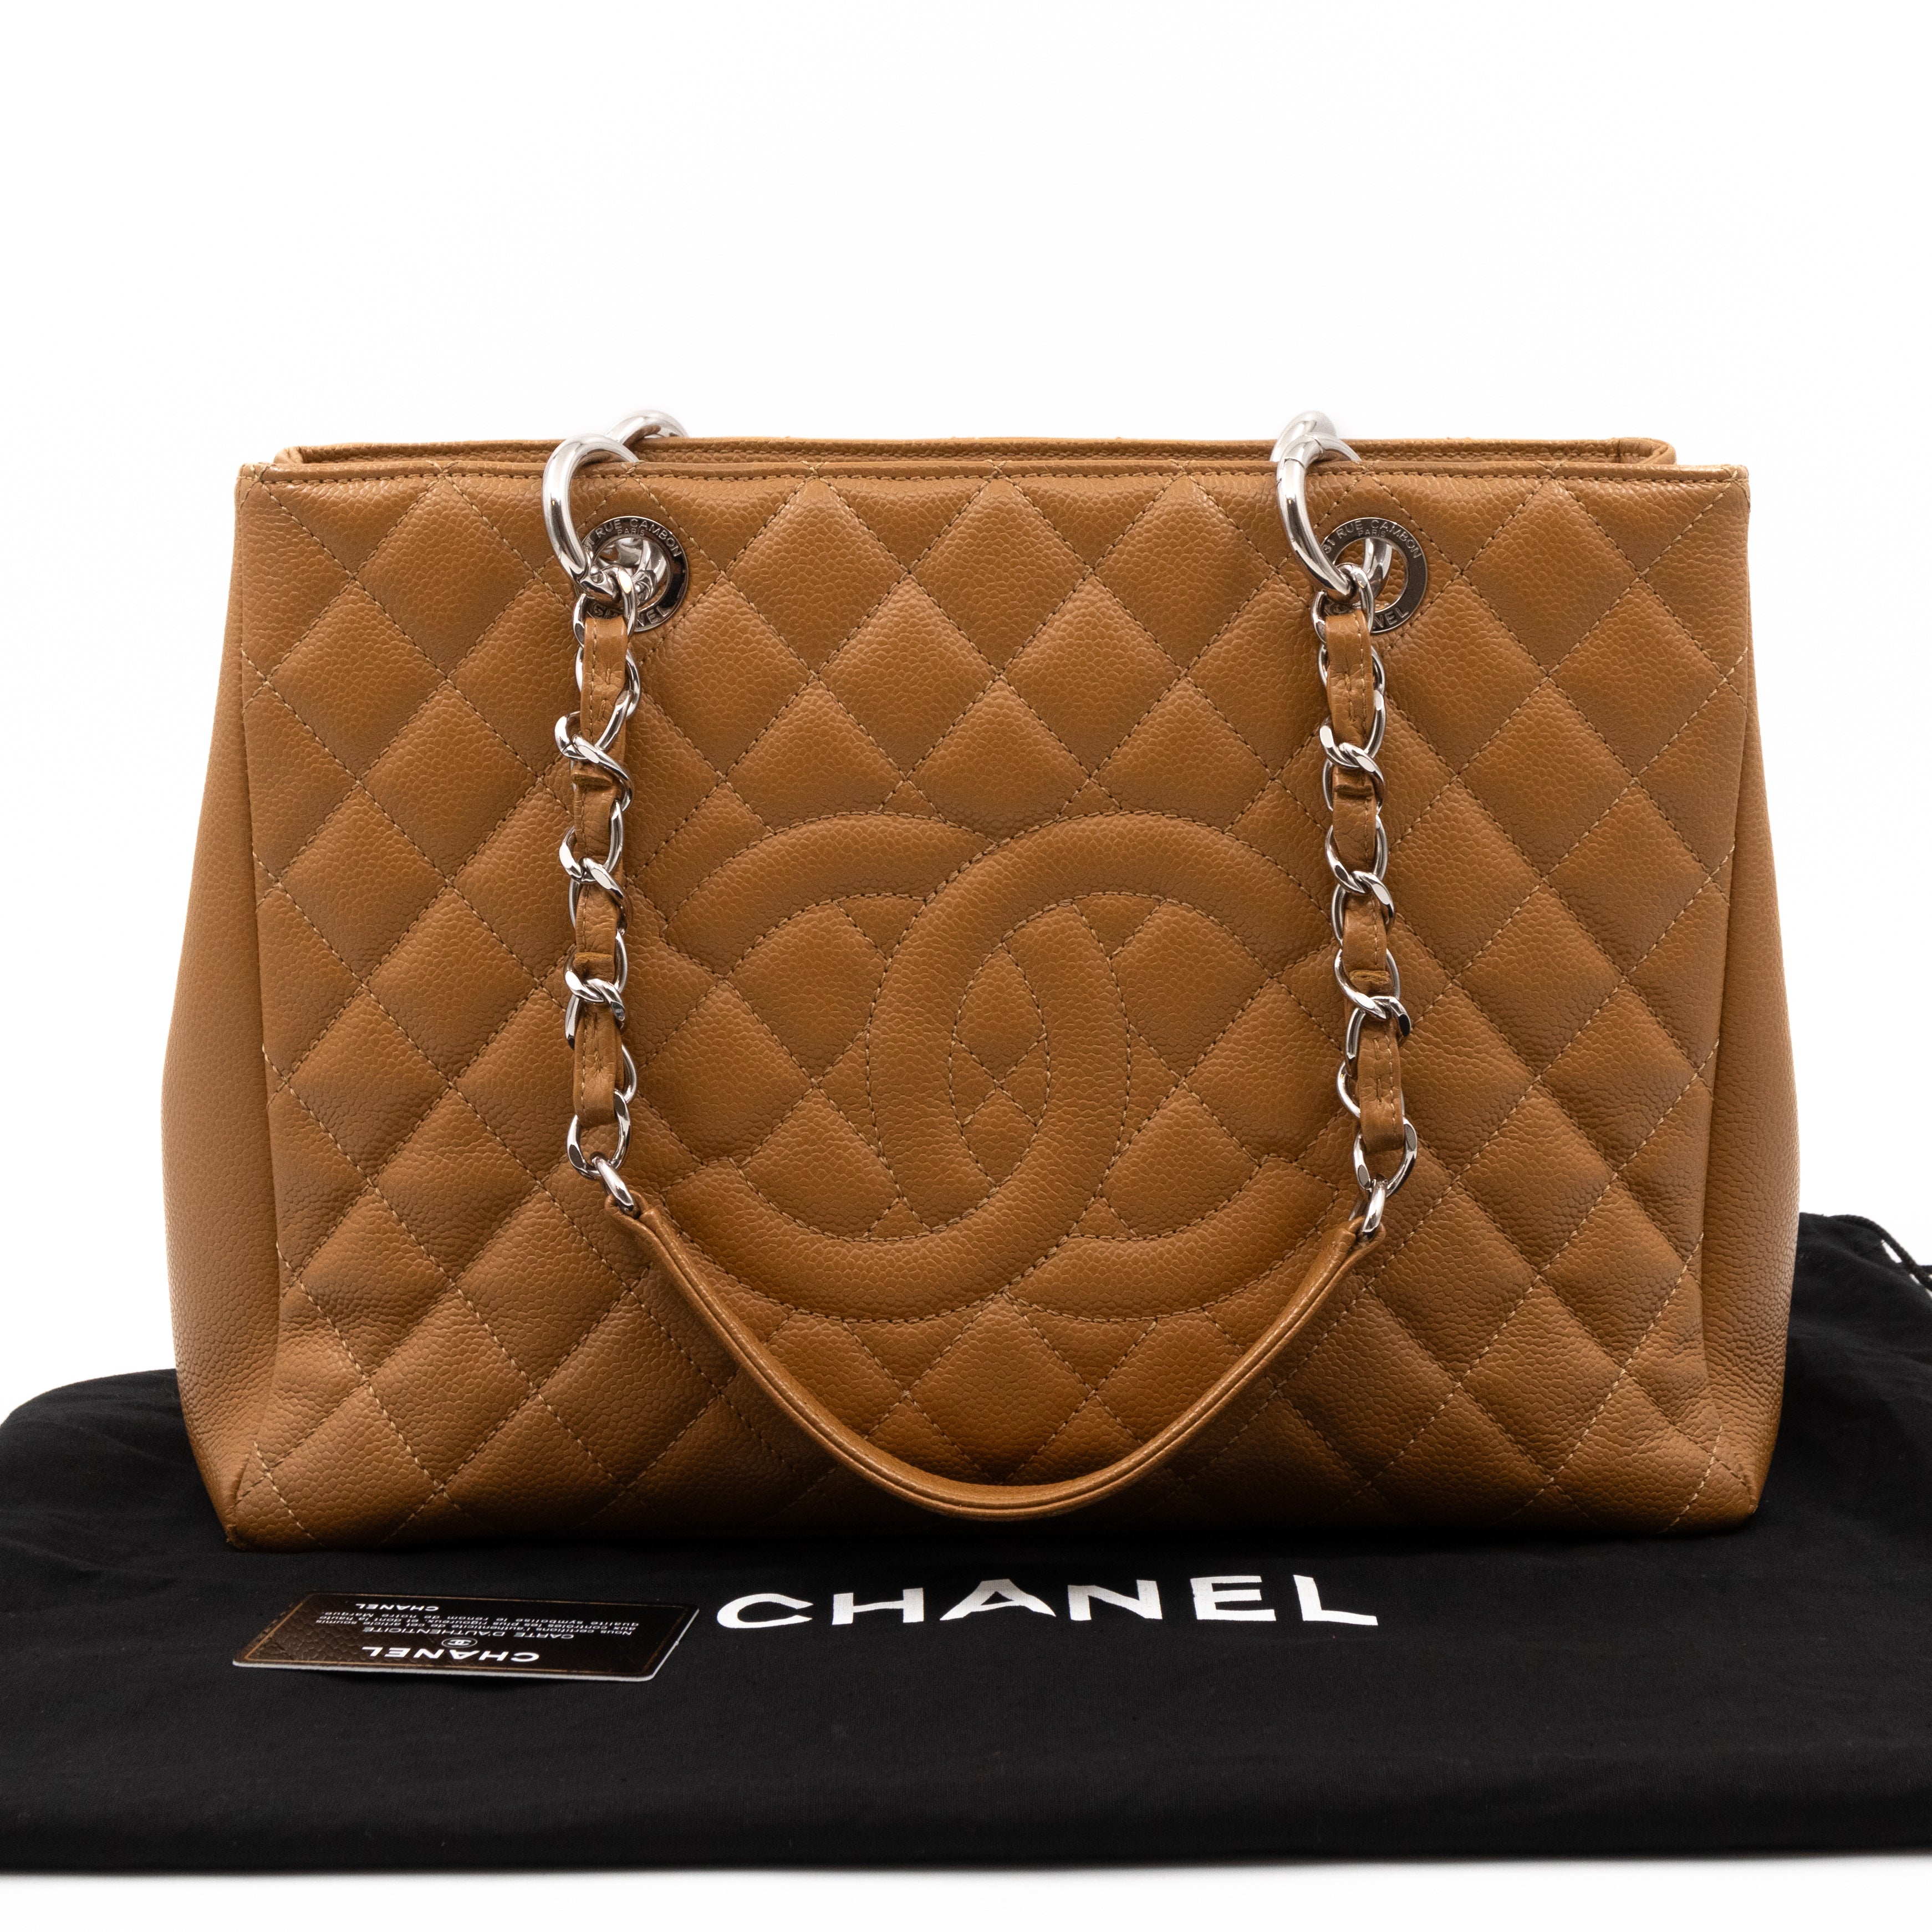 CHANEL GST: DRESSED UP OR DOWN | JEN LOOKS AND COOKS